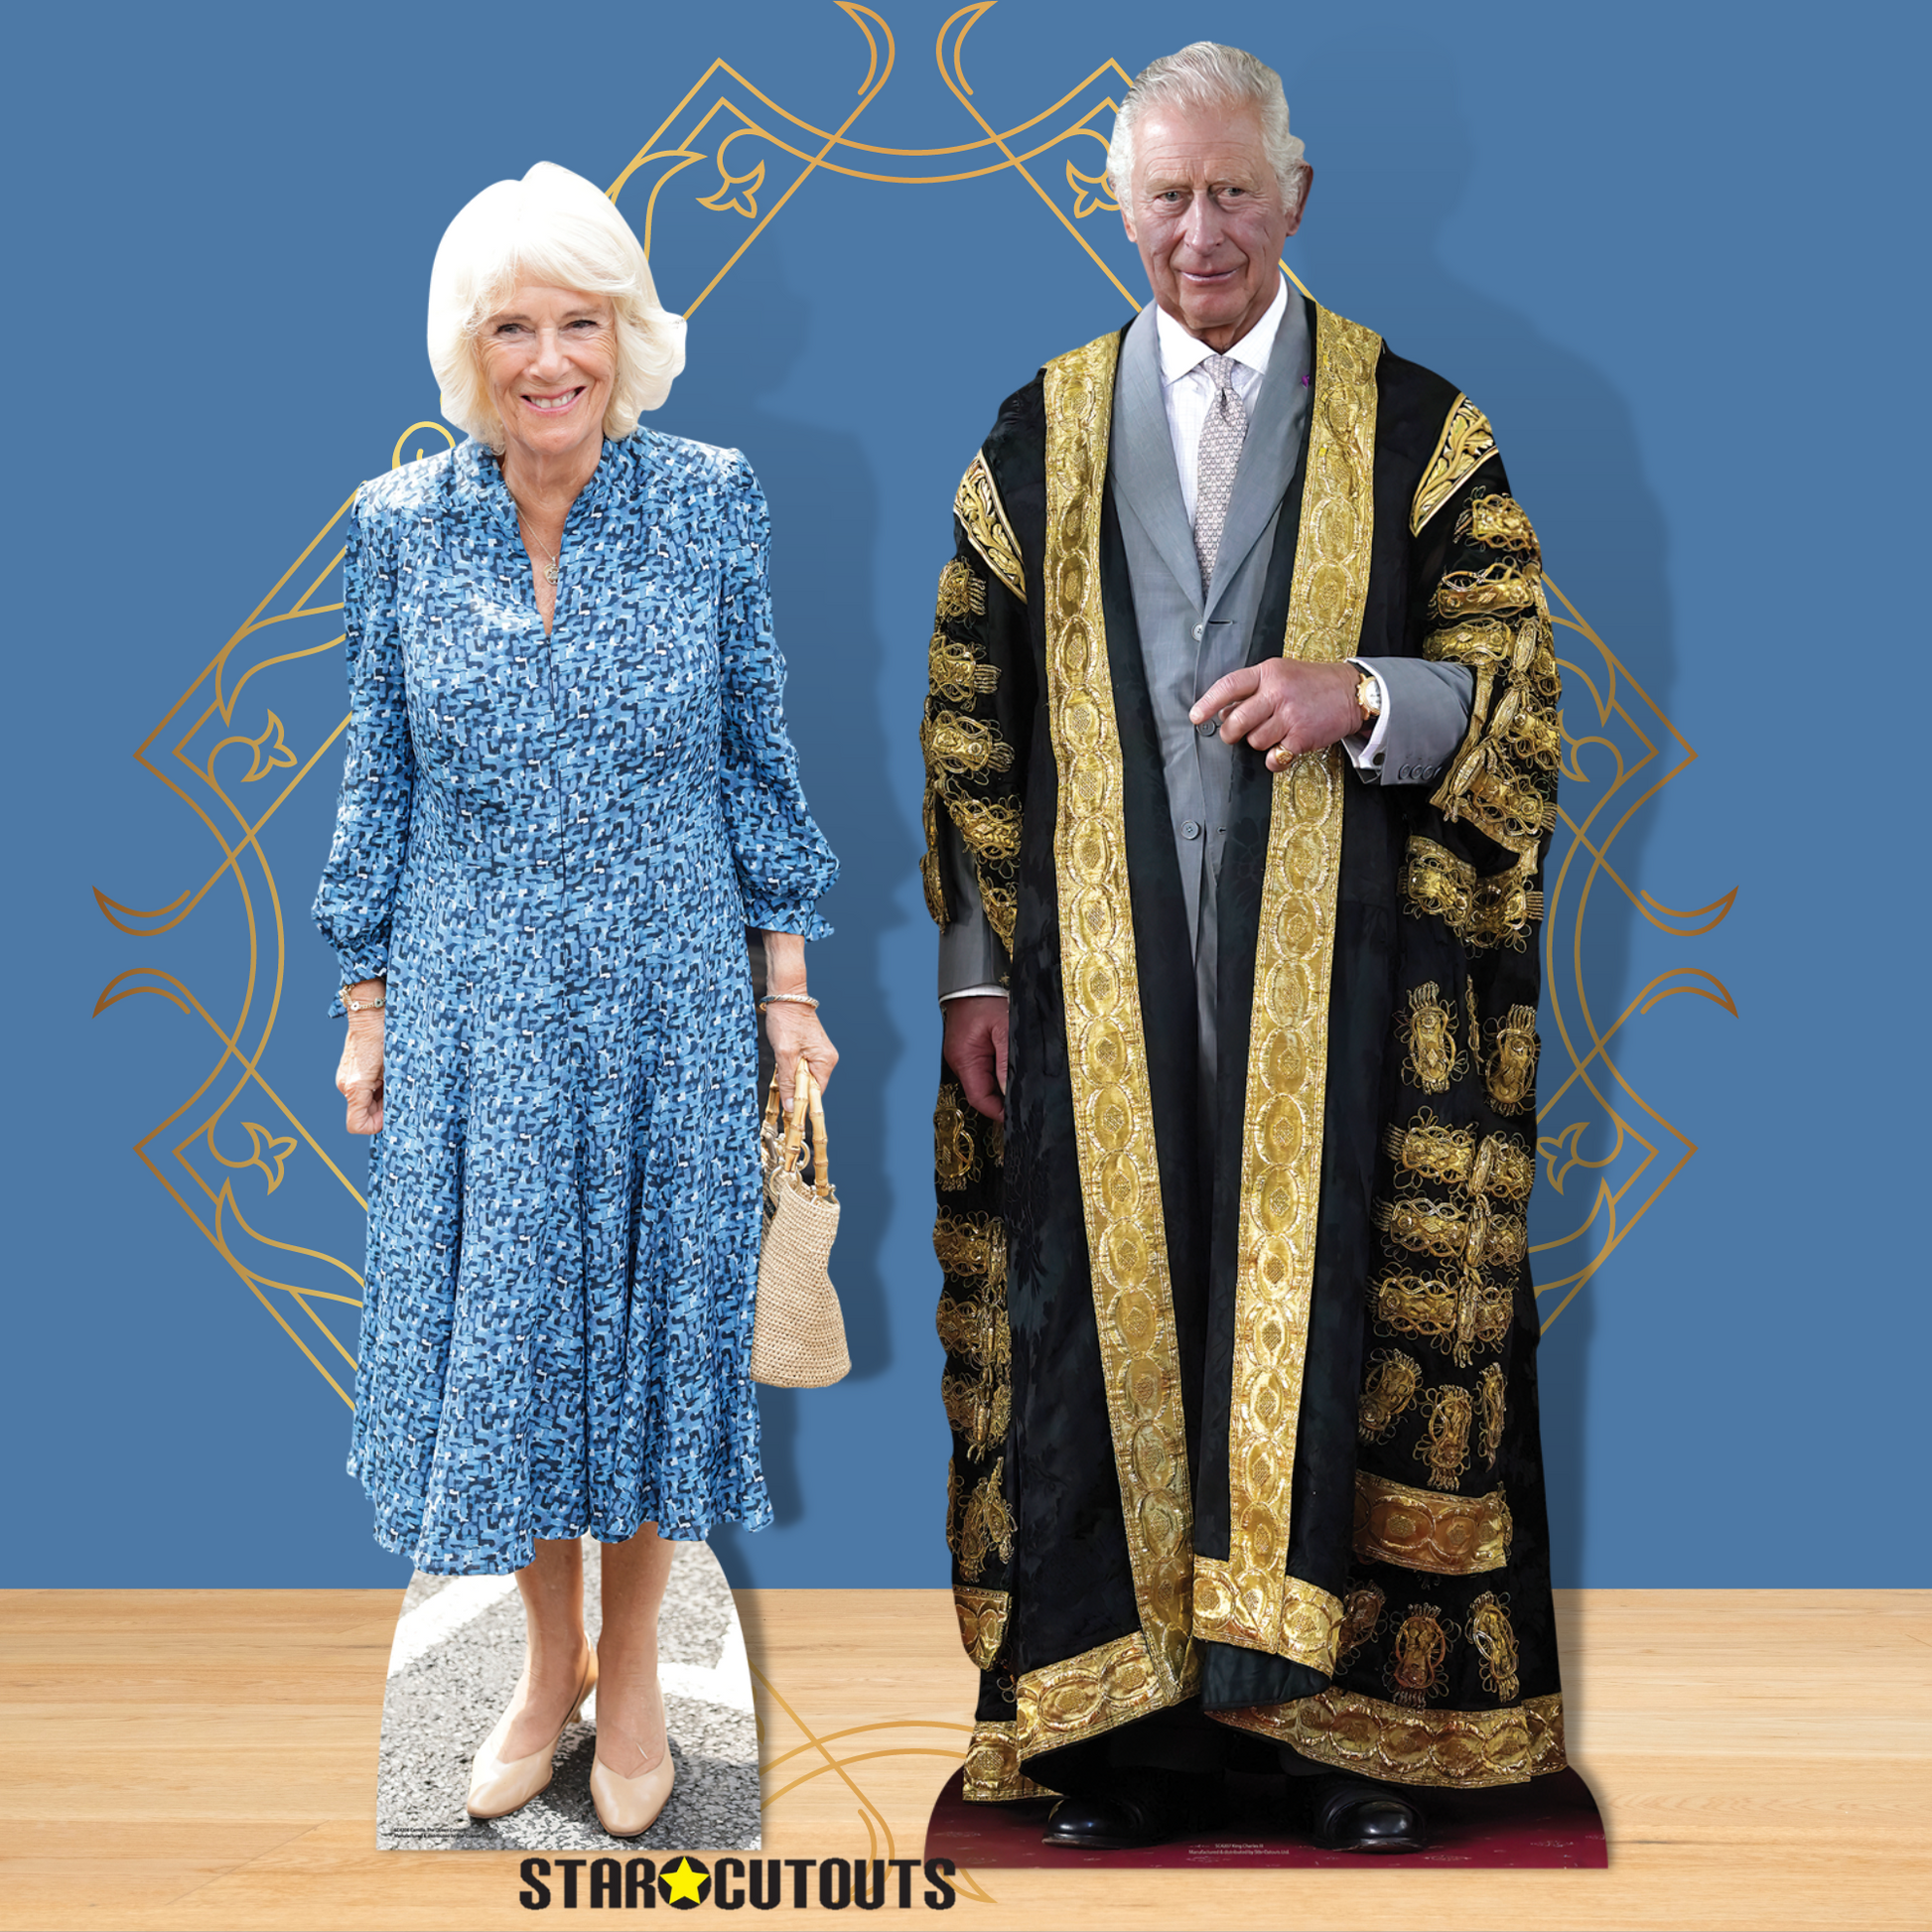 SC4263 Charles Prince of Wales Cardboard Cut Out Height 181cm 